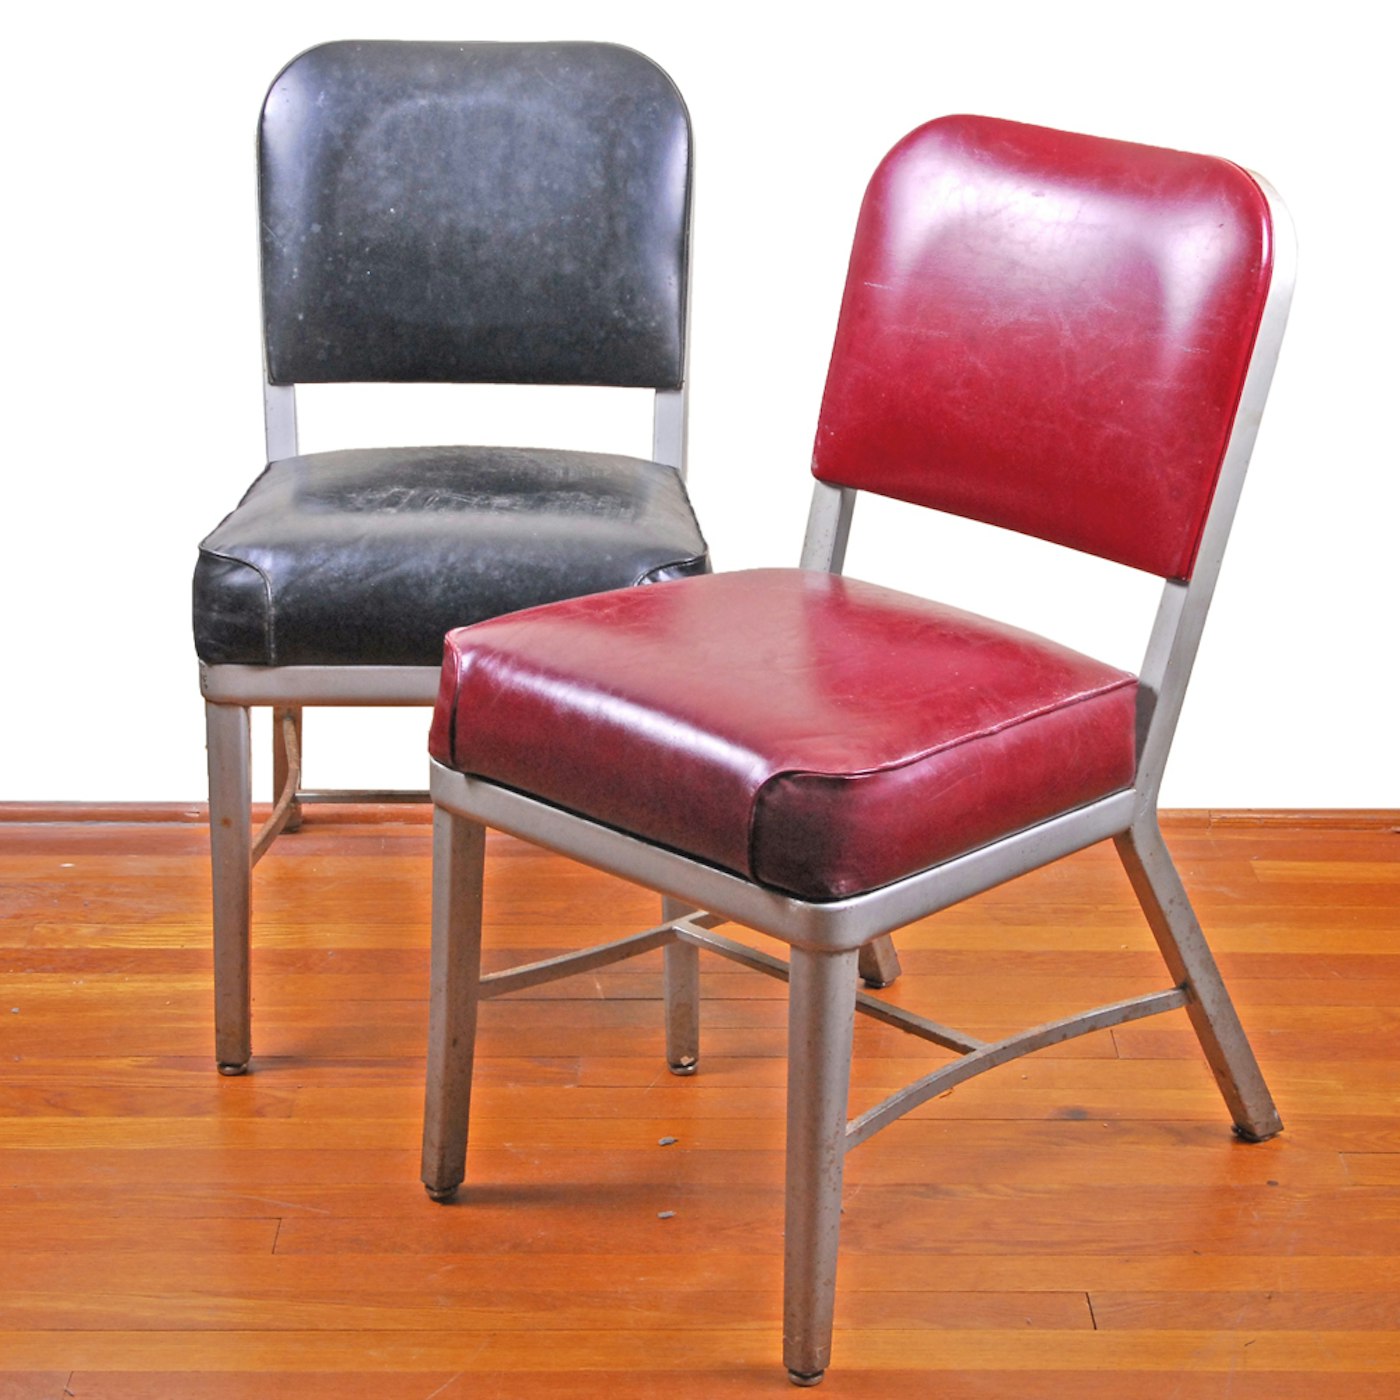 Vintage Mid-Century Office Chairs by Cole Steel | EBTH